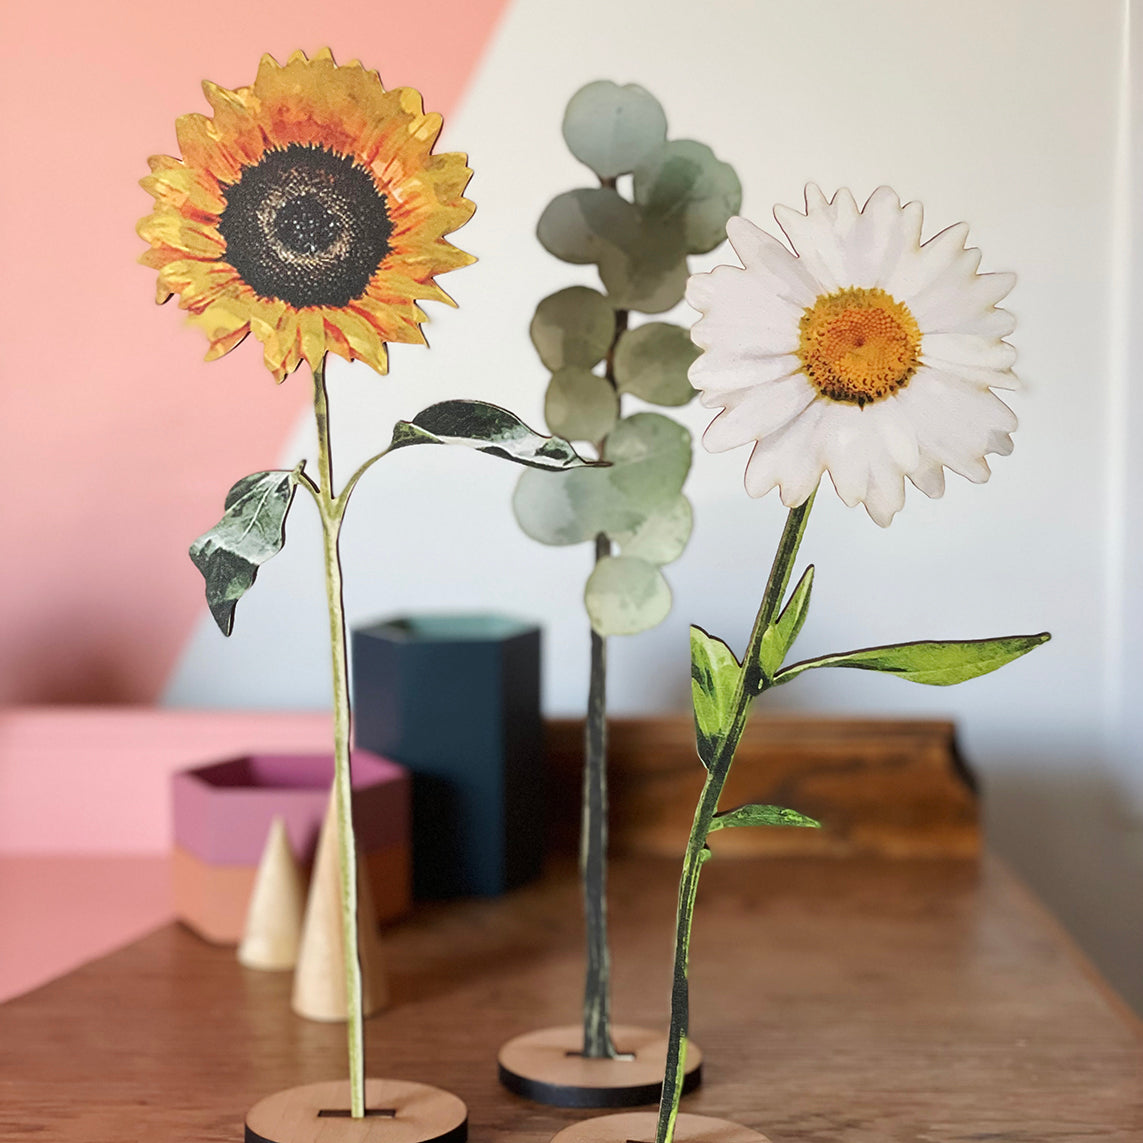 Display of a wooden sunflower, daisy and eucalyptus leaves